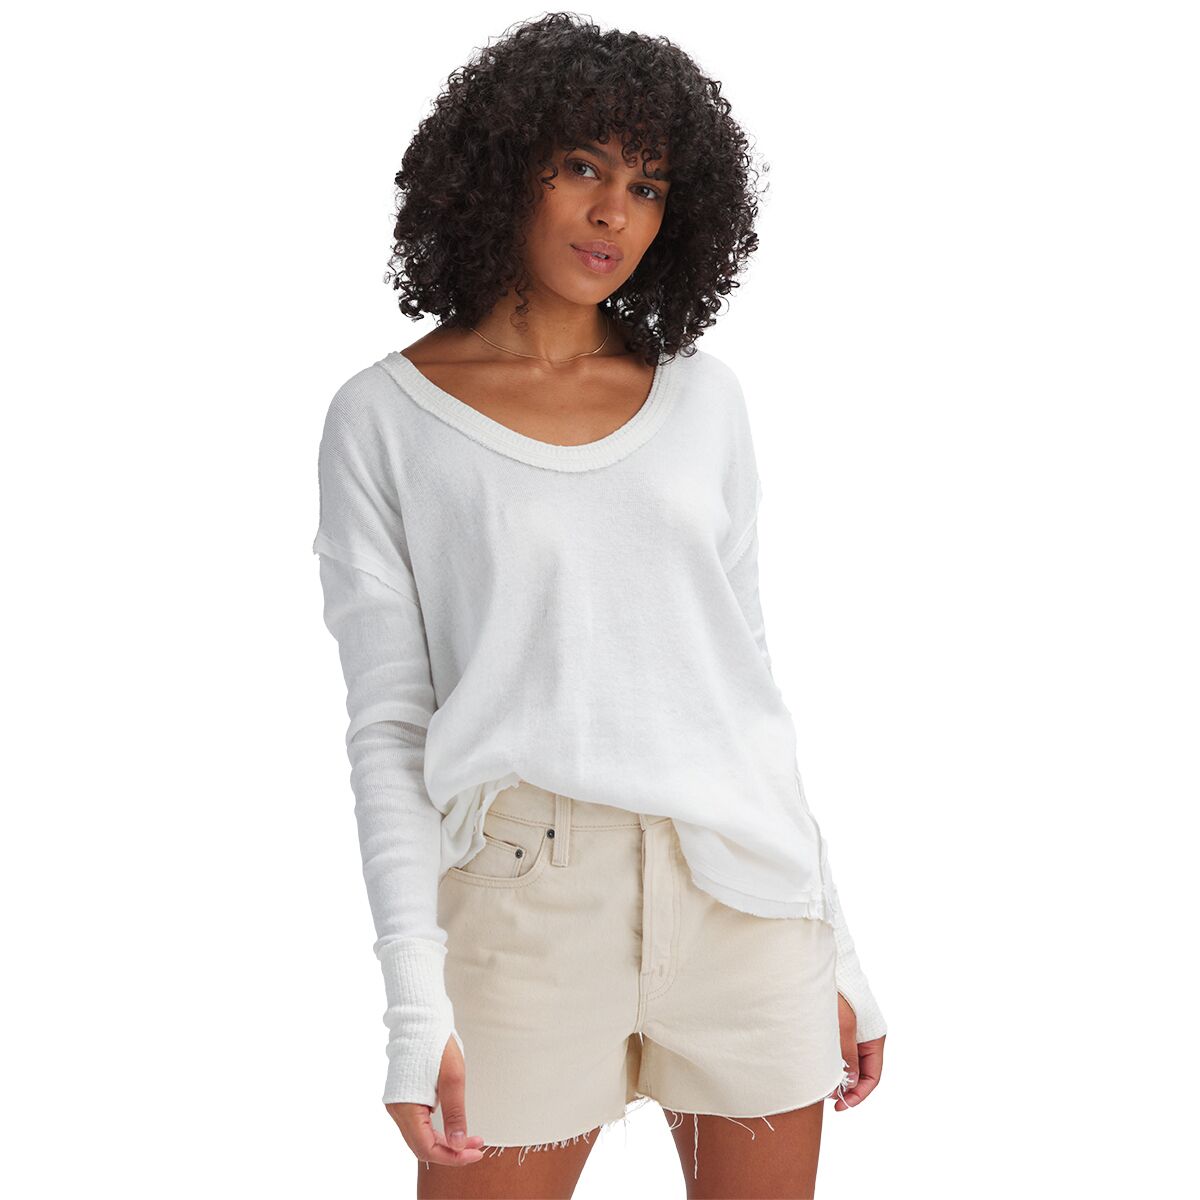 Free People Colby Long-Sleeve Shirt - Women's